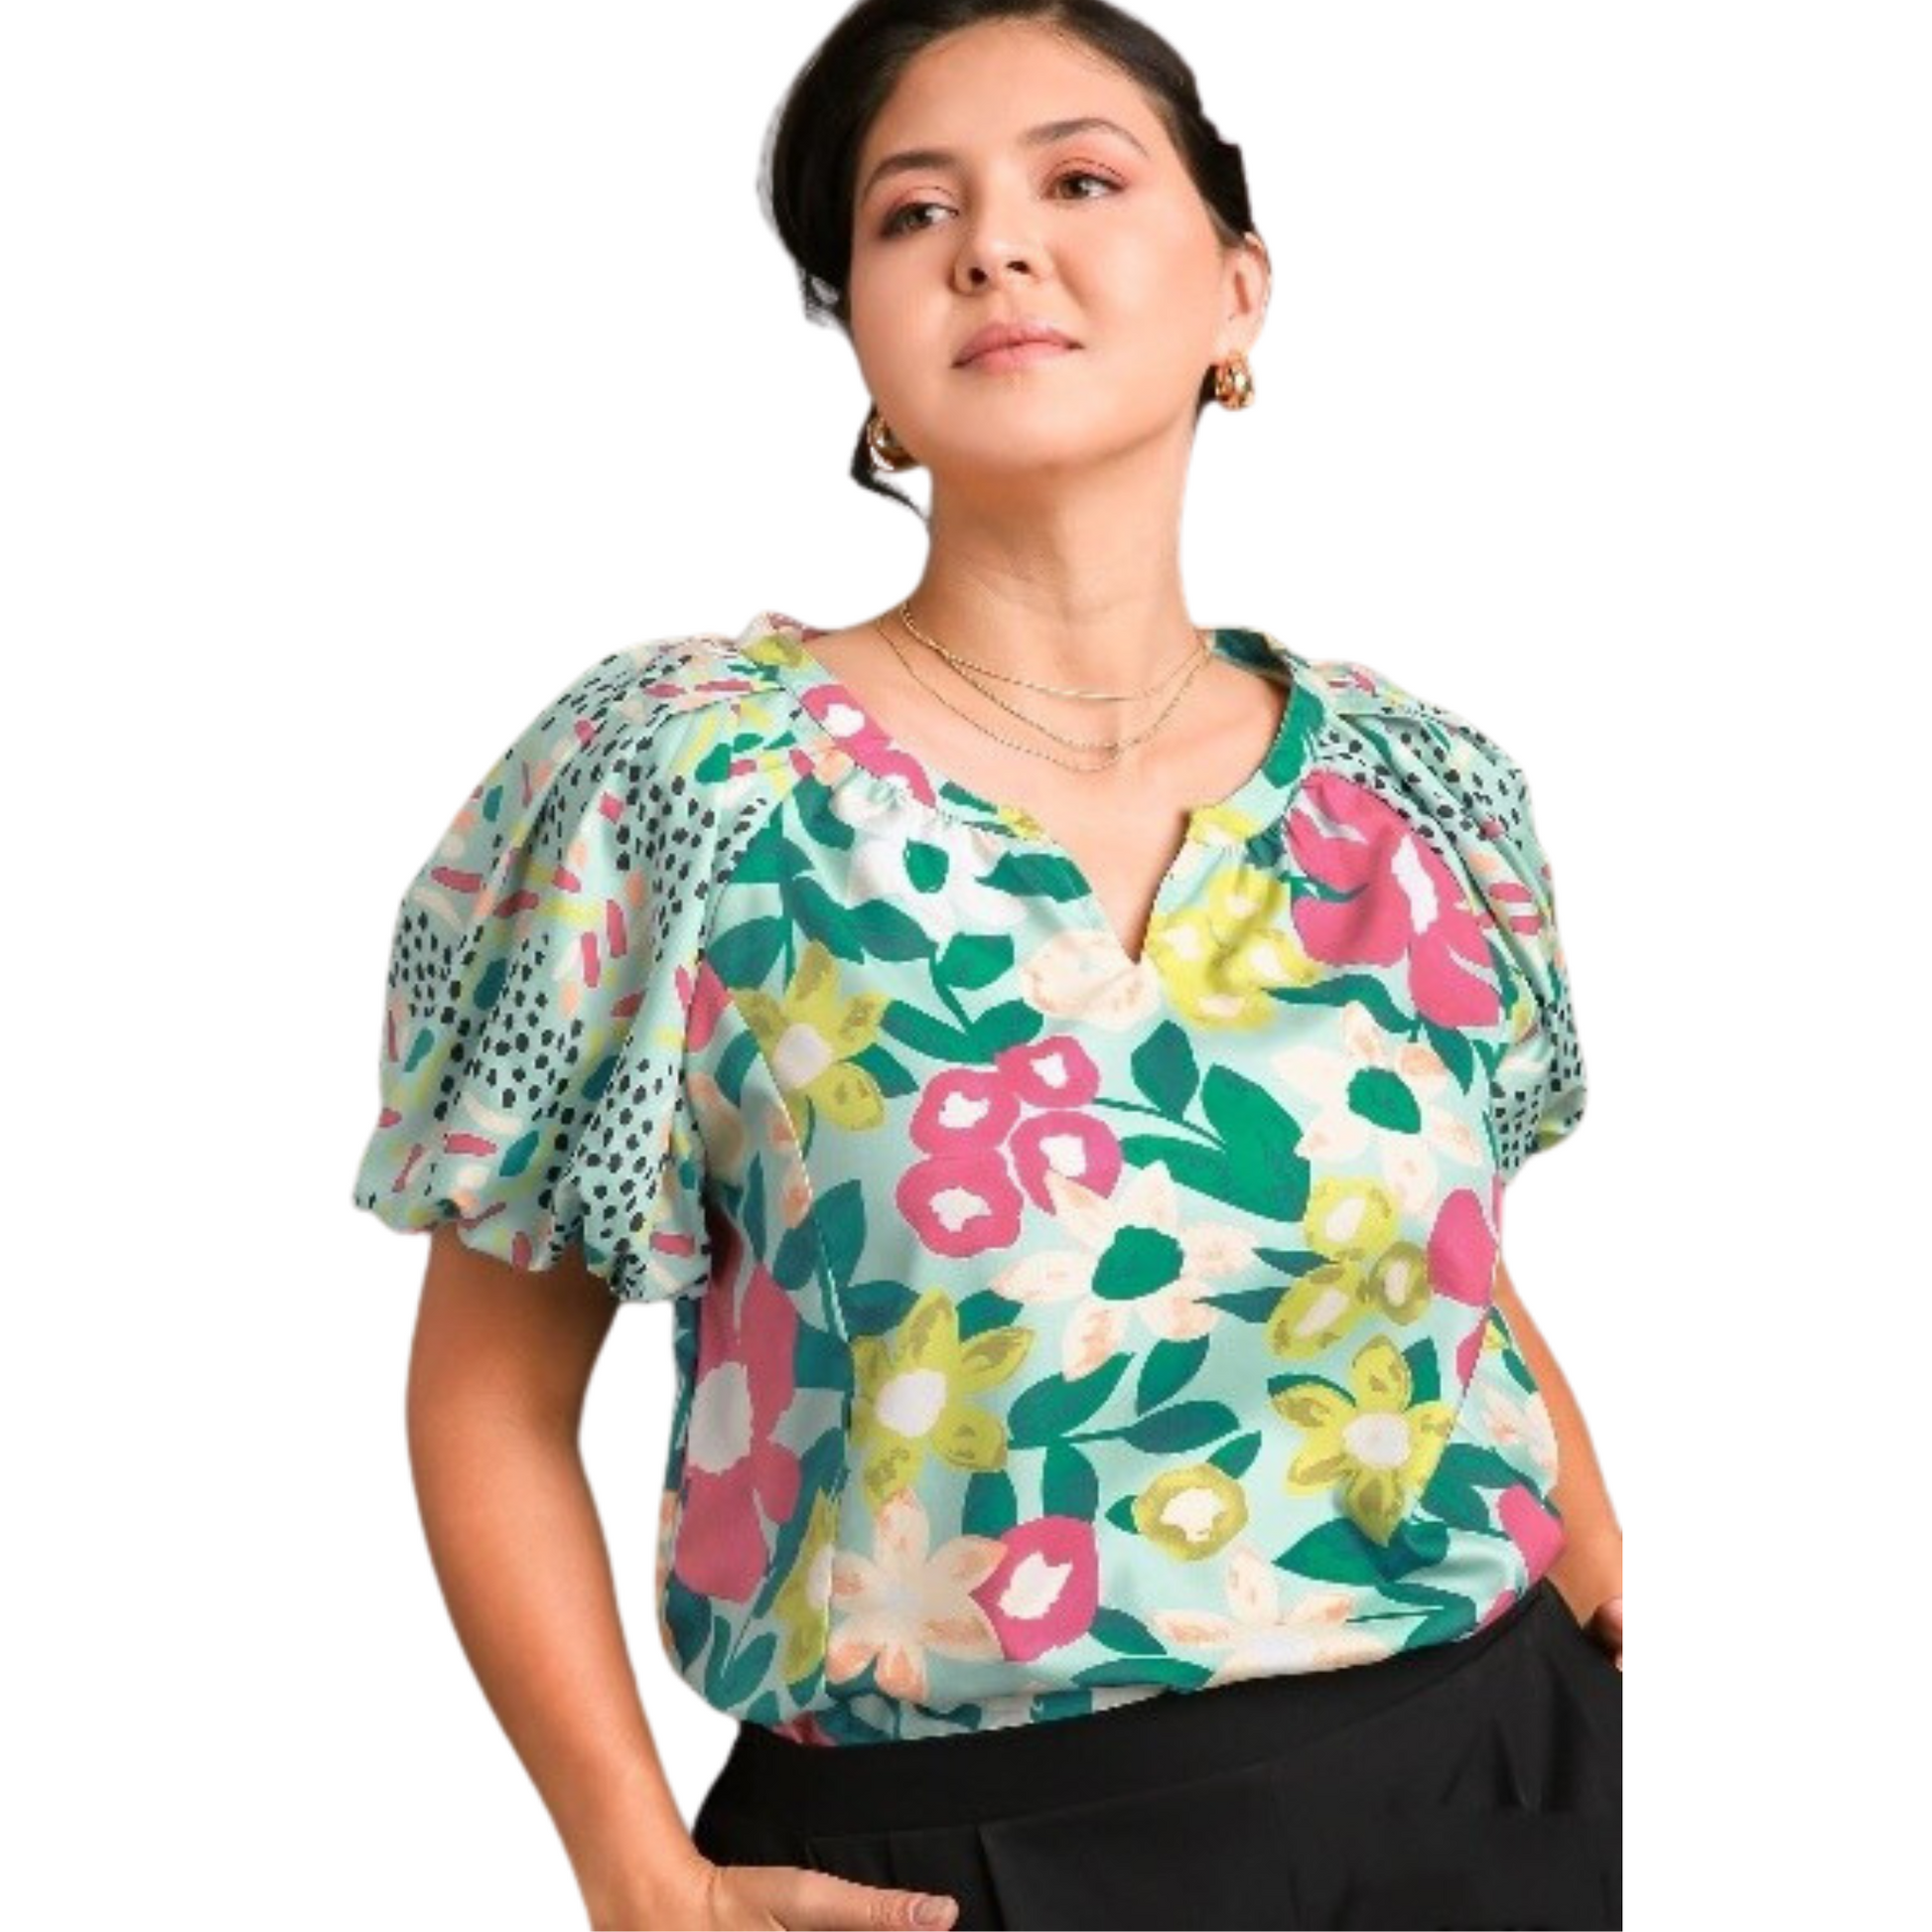 This Mixed Media Bubble Sleeve Top features a mint mix floral print and short sleeves for a flirty and whimsical look. Perfect for spring, its soft and lightweight fabric will keep you feeling comfortable all day.